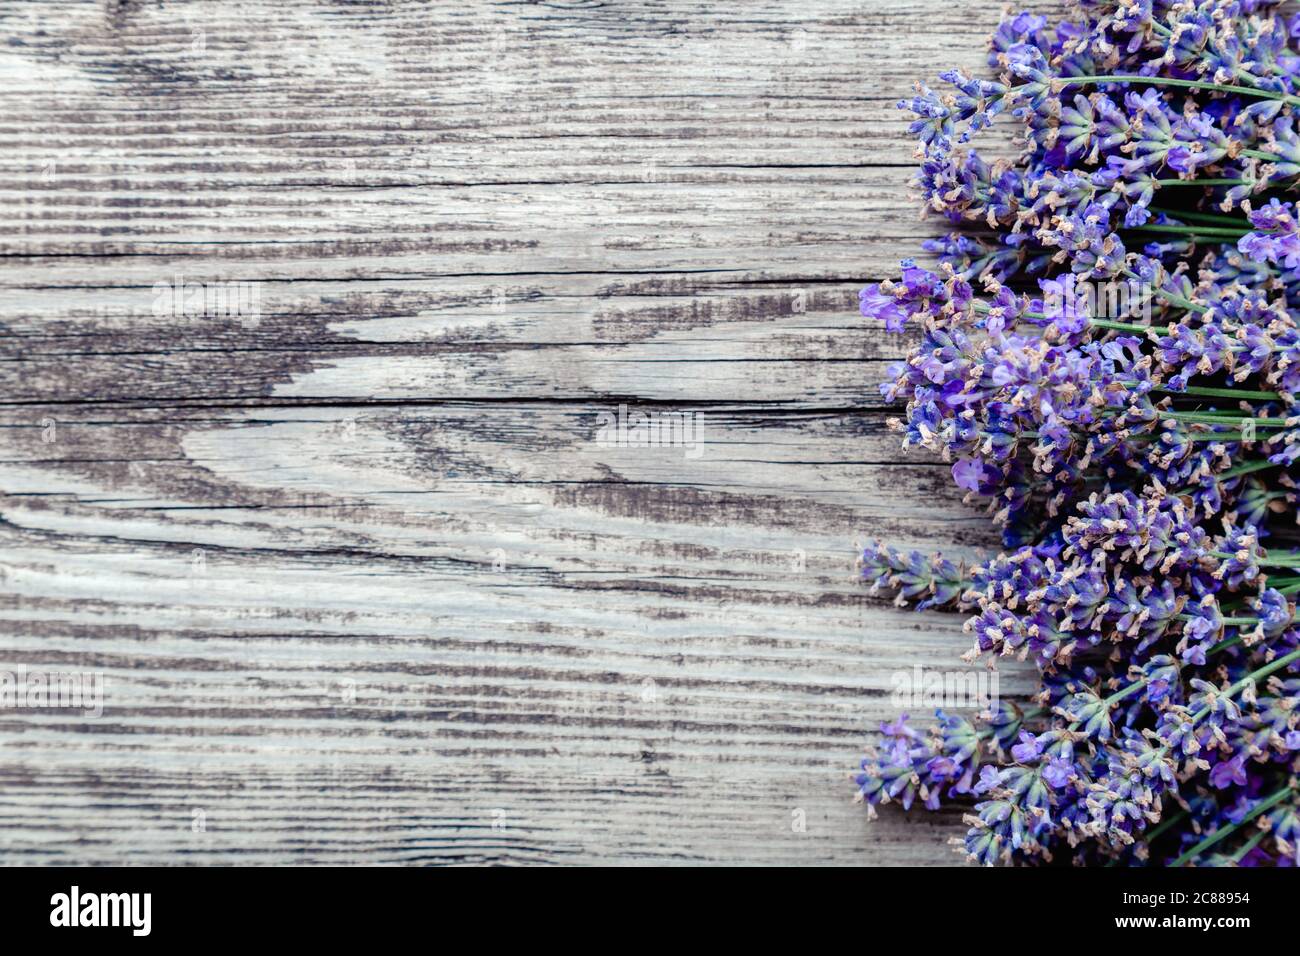 Fresh lavender flowers blossom on old rustic wooden board background with  copy space for text. Flatlay french provence style lavender flower blossom  Stock Photo - Alamy